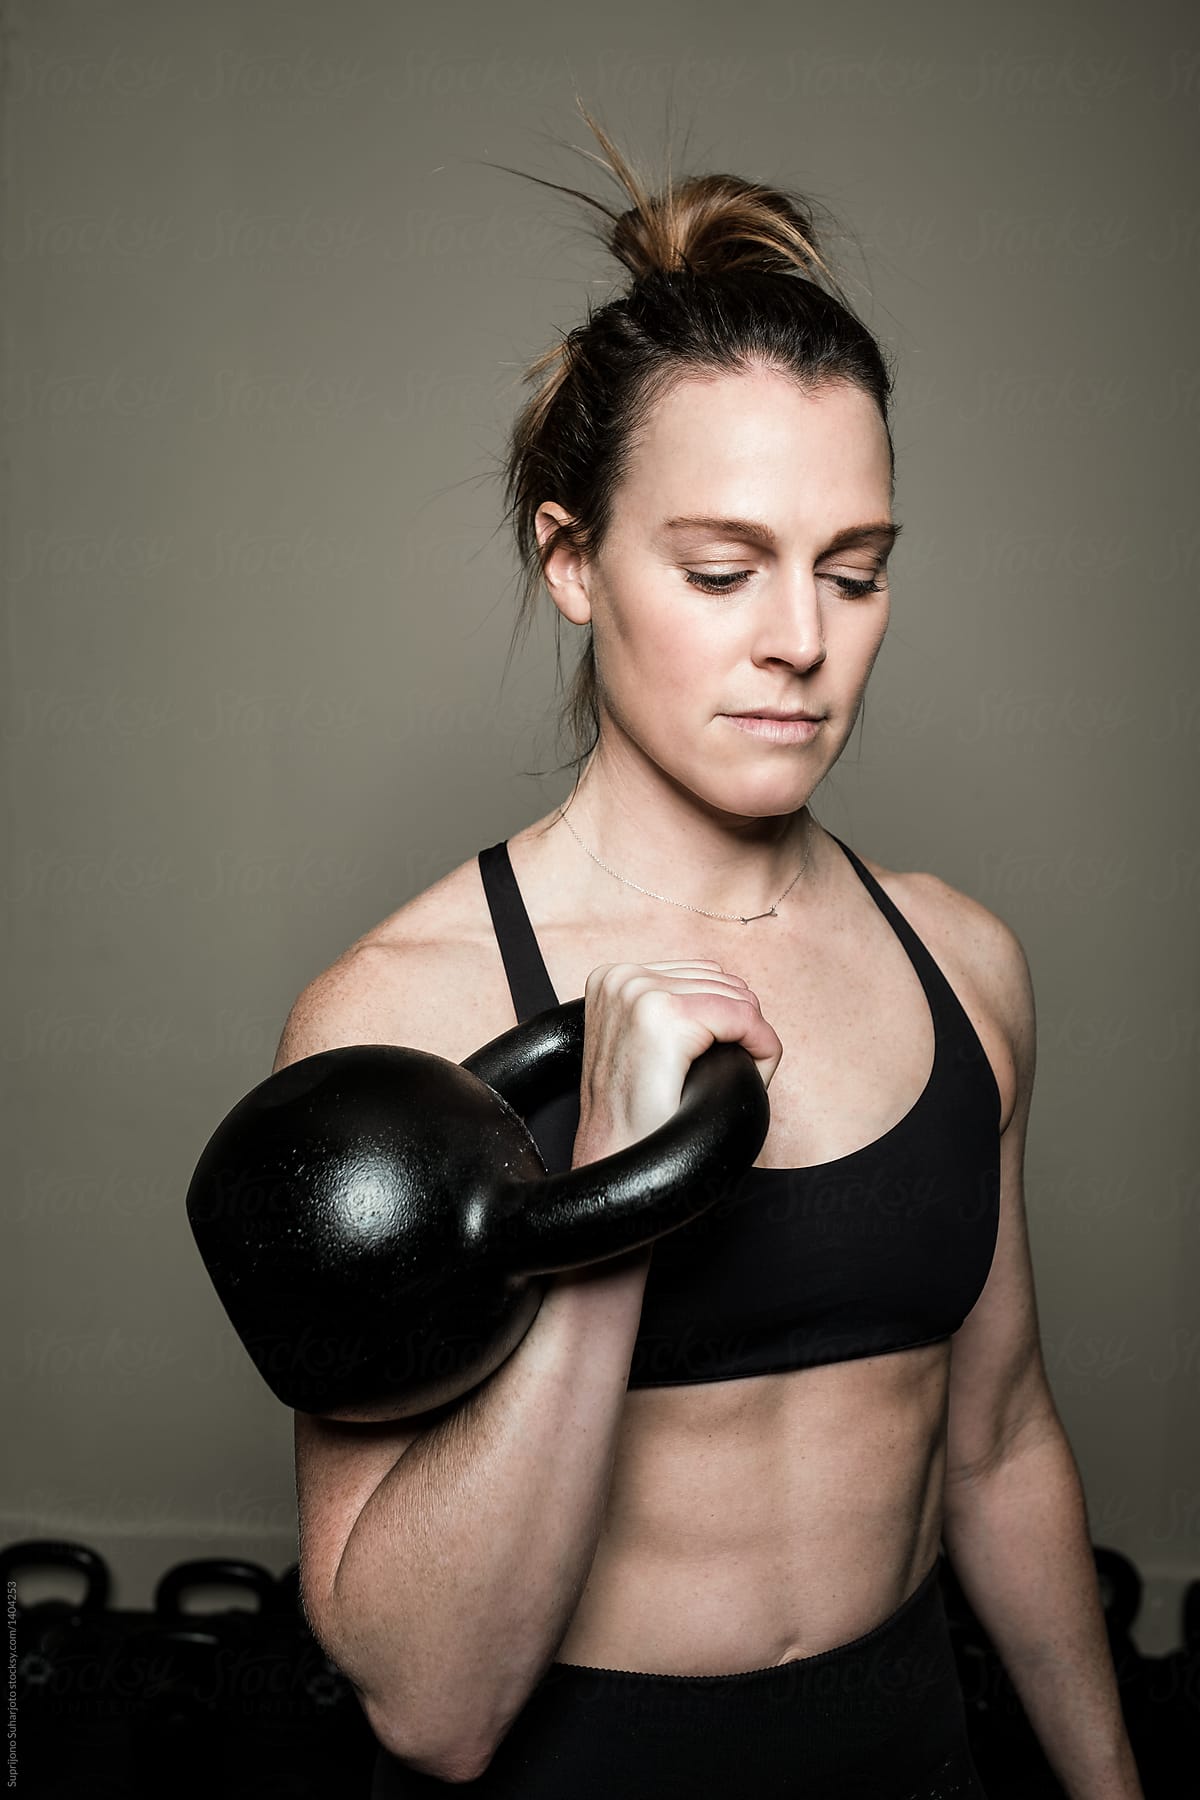 Woman Working Out In The Home Gym With Kettle Bell By Stocksy Contributor Take A Pix Media